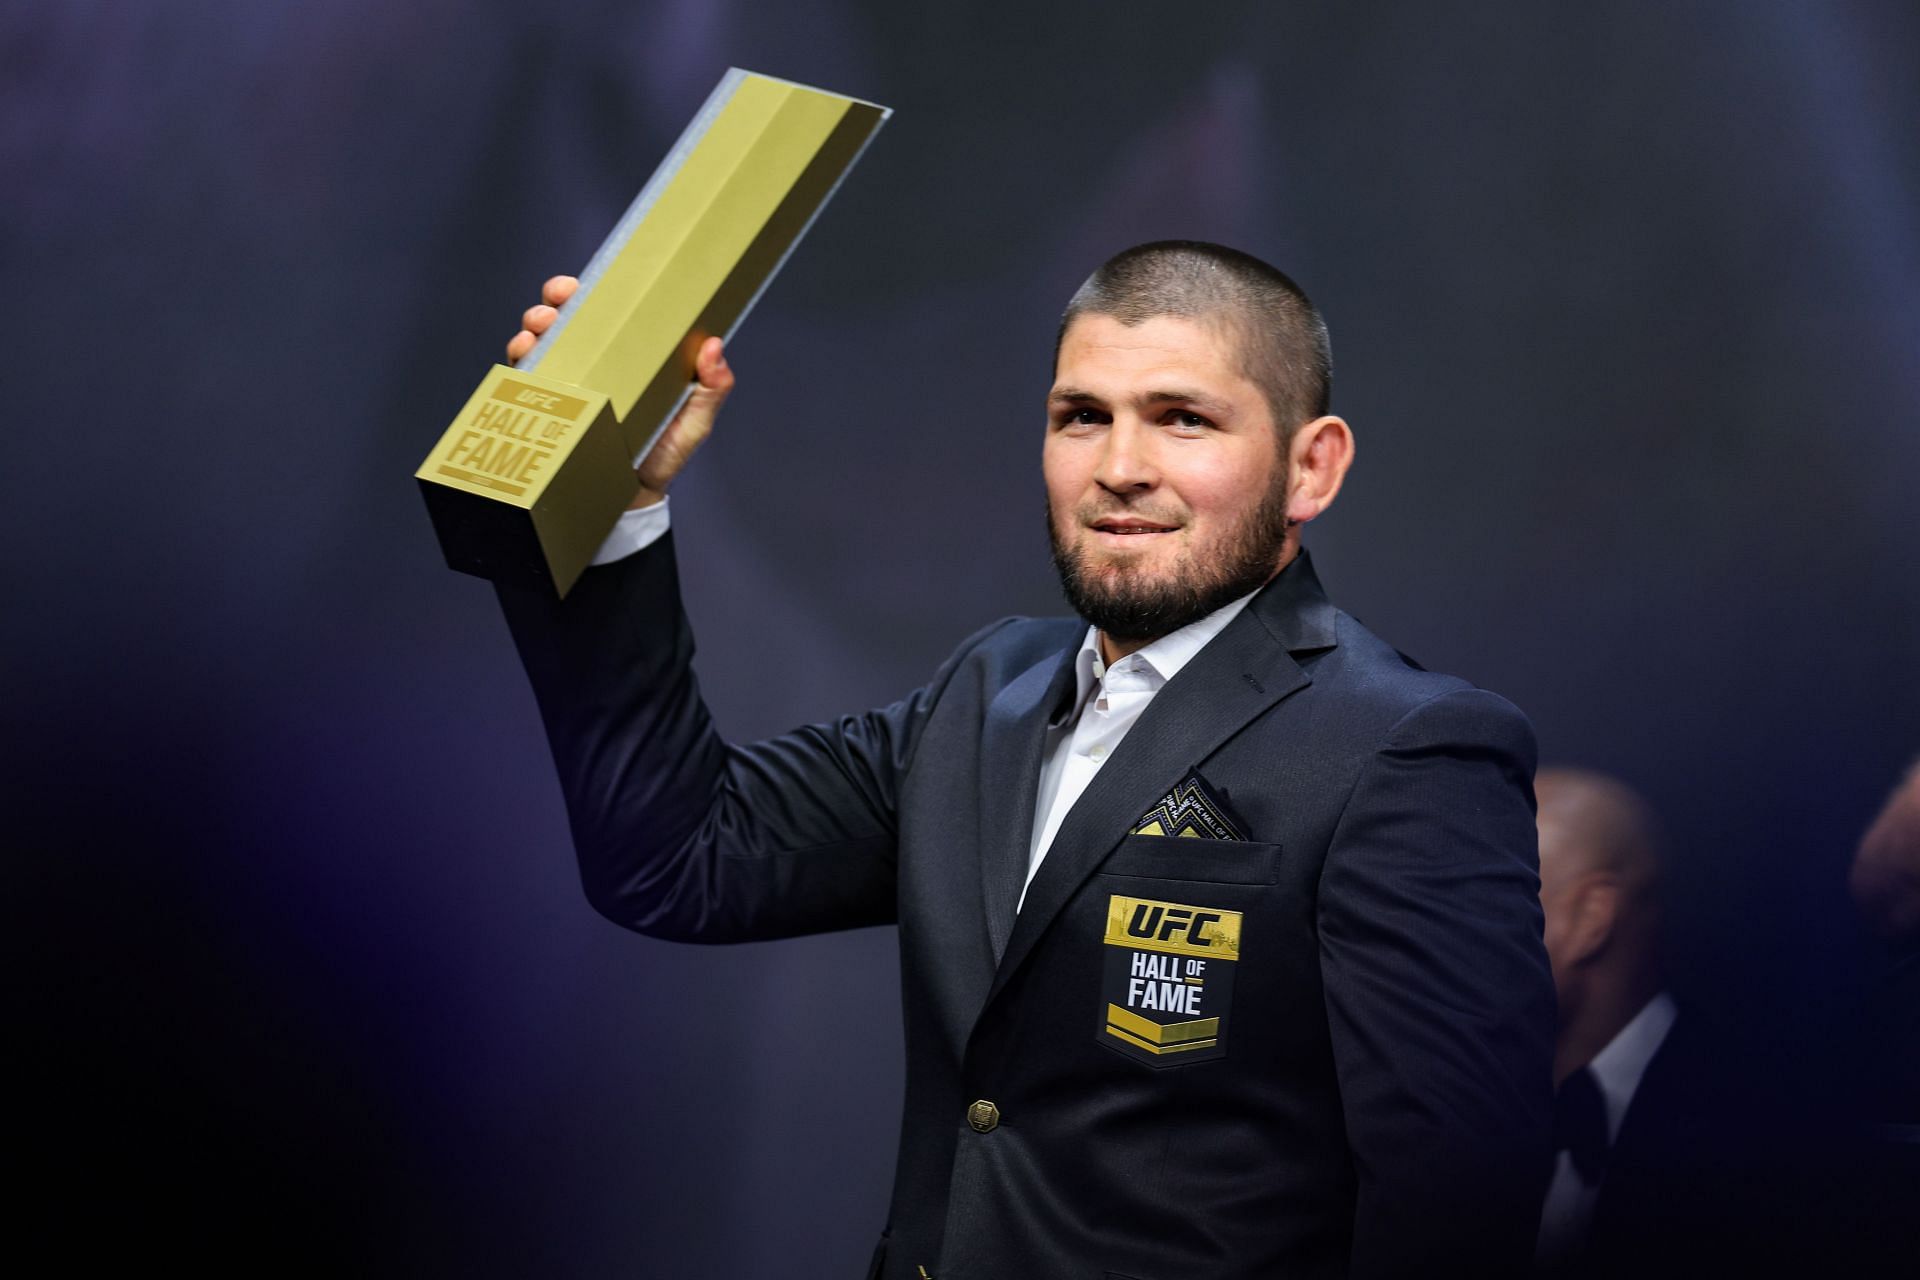 Khabib Nurmagomedov at the UFC Hall of Fame Class of 2022 Induction Ceremony